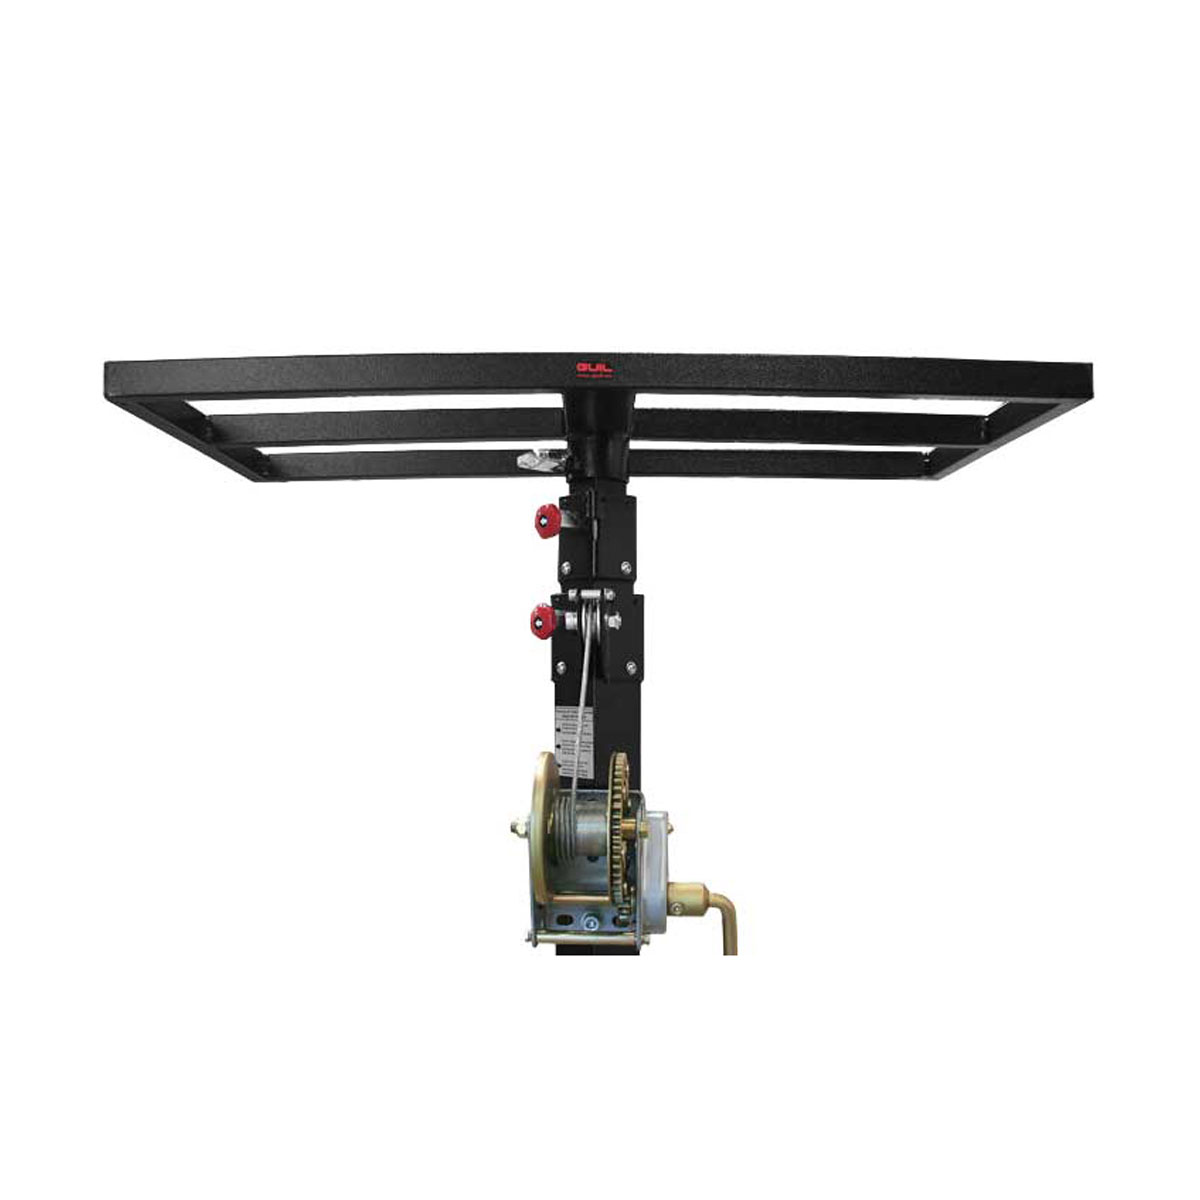 Platform weight tray for GUIL Lifter